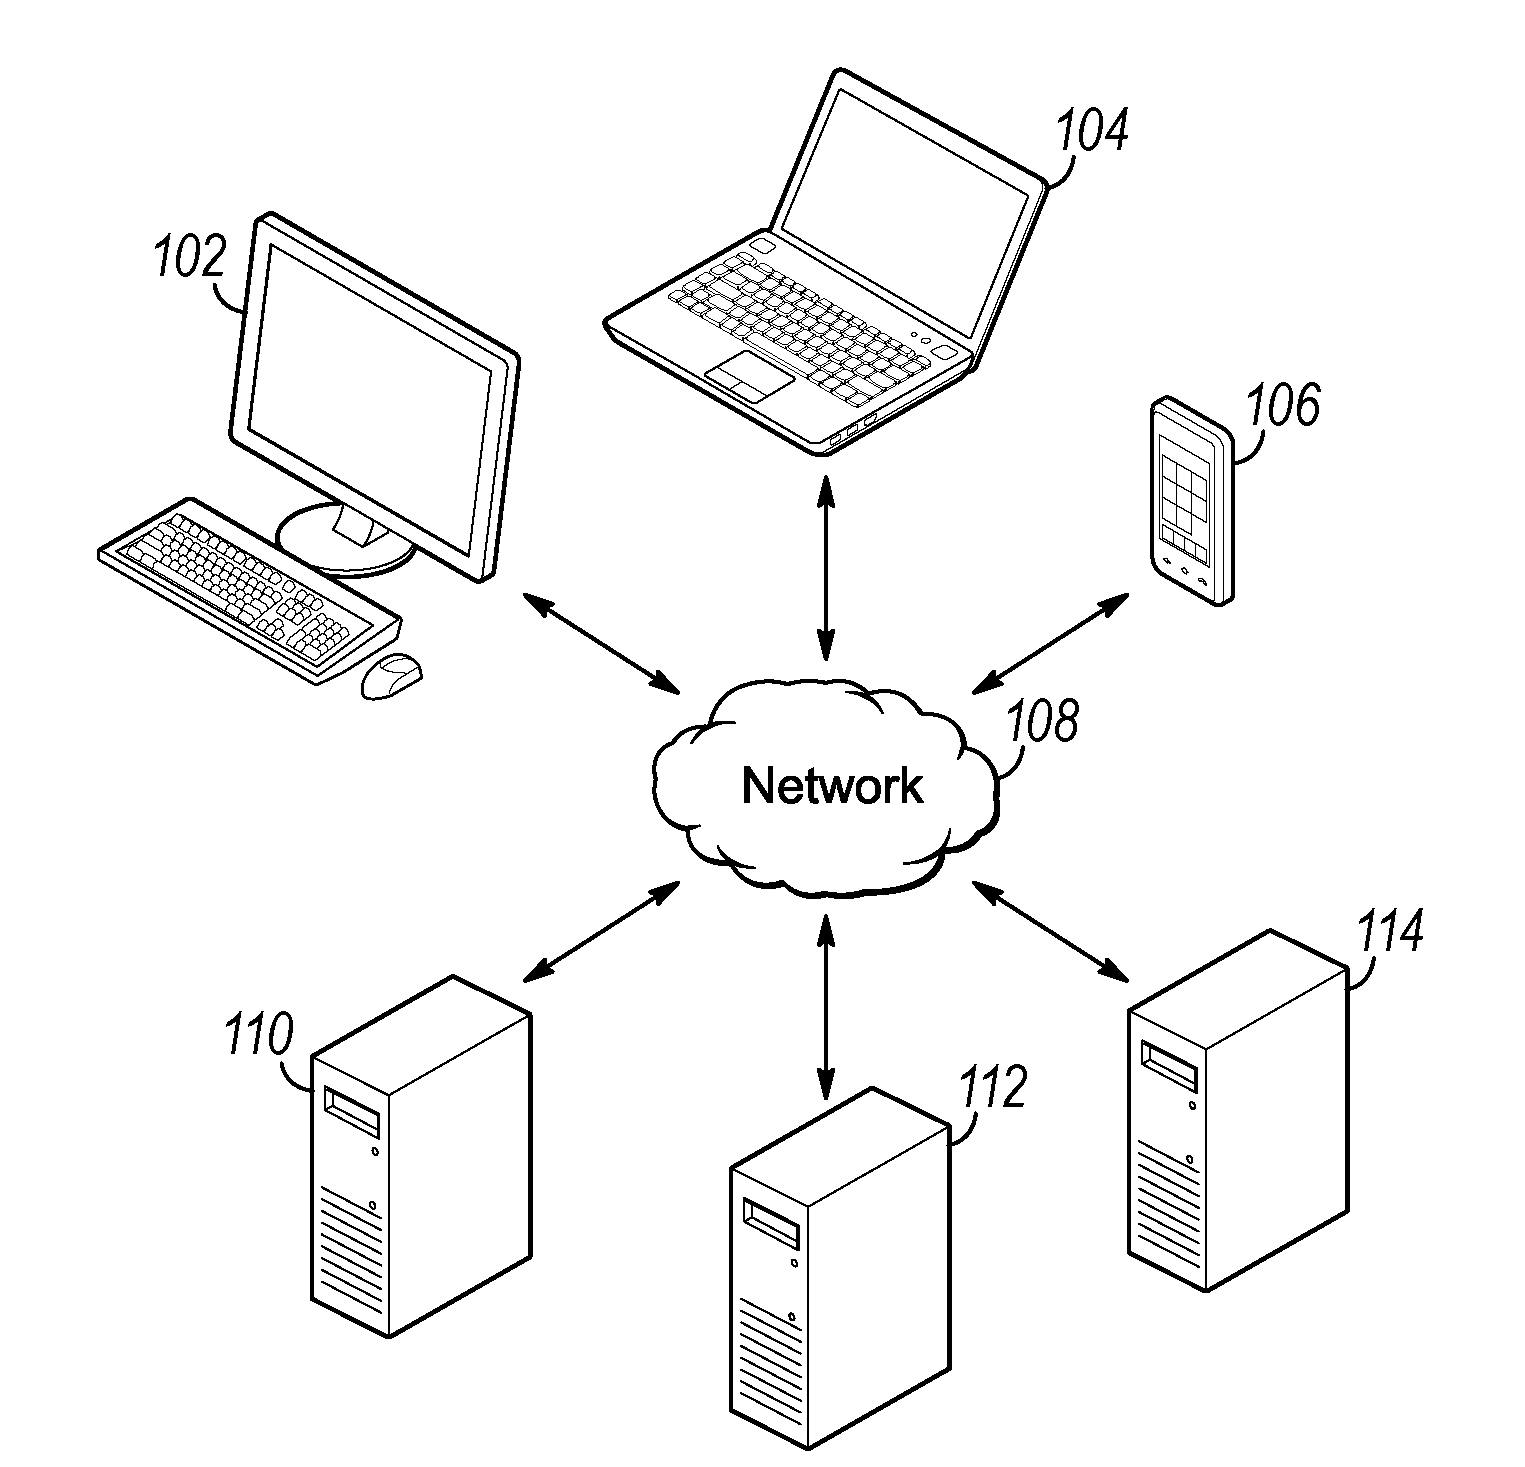 Systems and methods for electronic prescribing